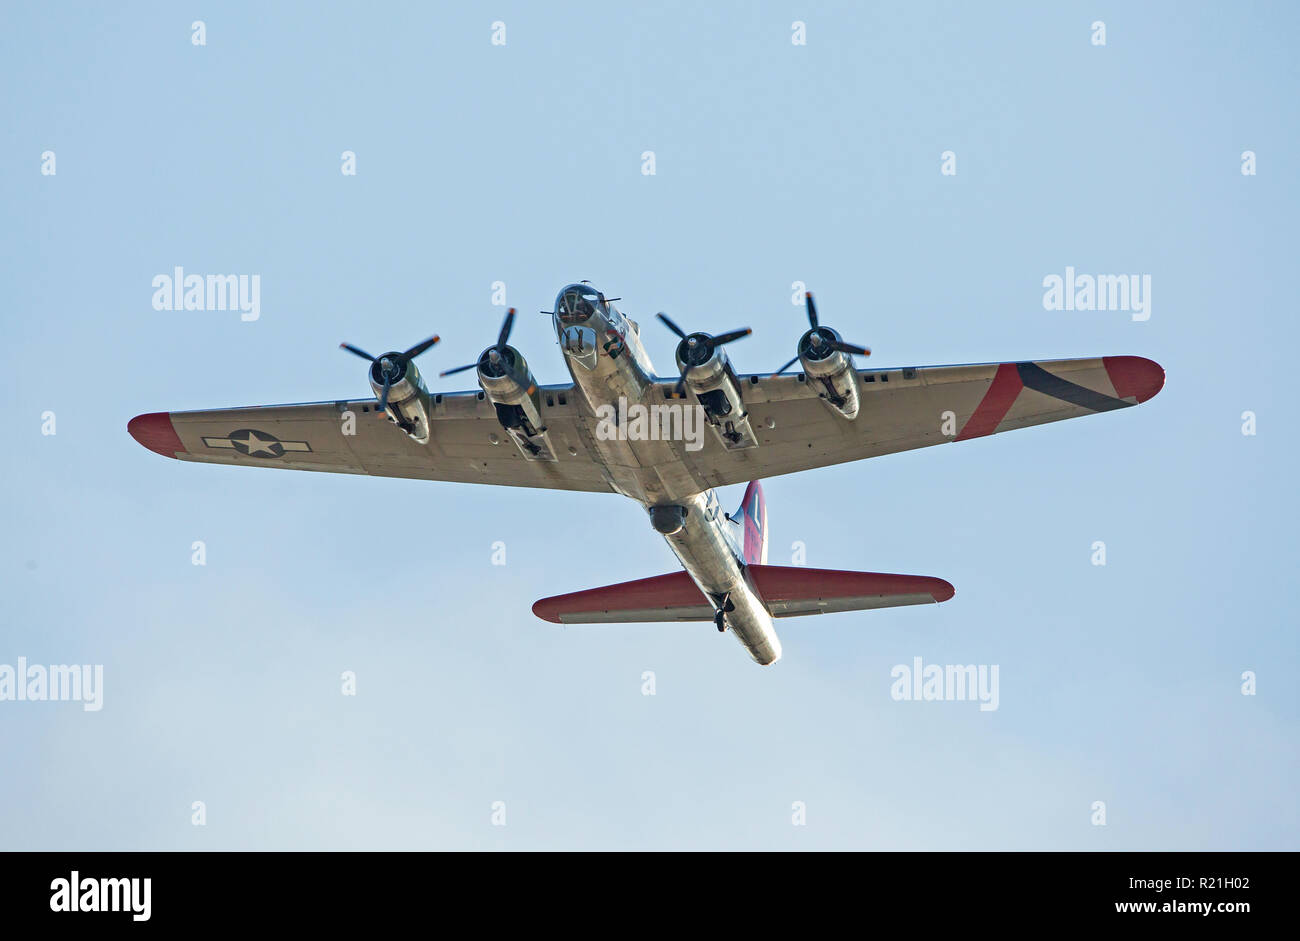 MONROE, NC (USA) - November 10, 2018: A B-17 "Flying Fortress" in flight against a clear blue sky at the Warbirds Over Monroe Air Show. Stock Photo